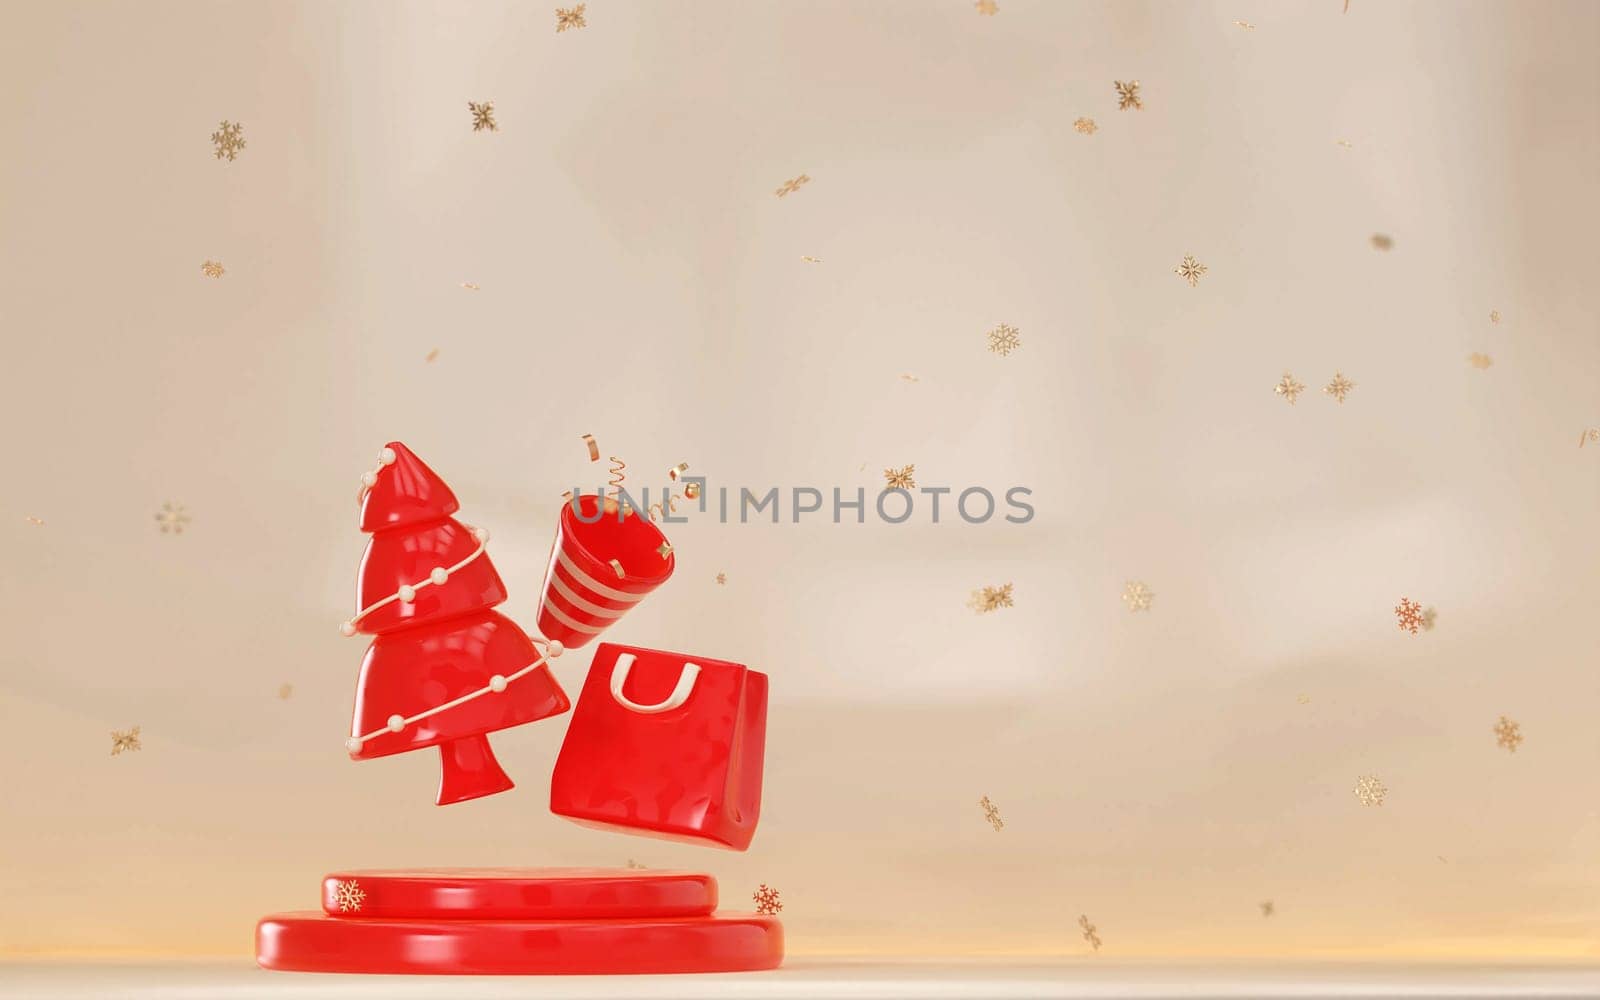 3D rendering, christmas tree,red bag and red party popper on red stand with light yellow background and Snow covered for New Year winter banner..